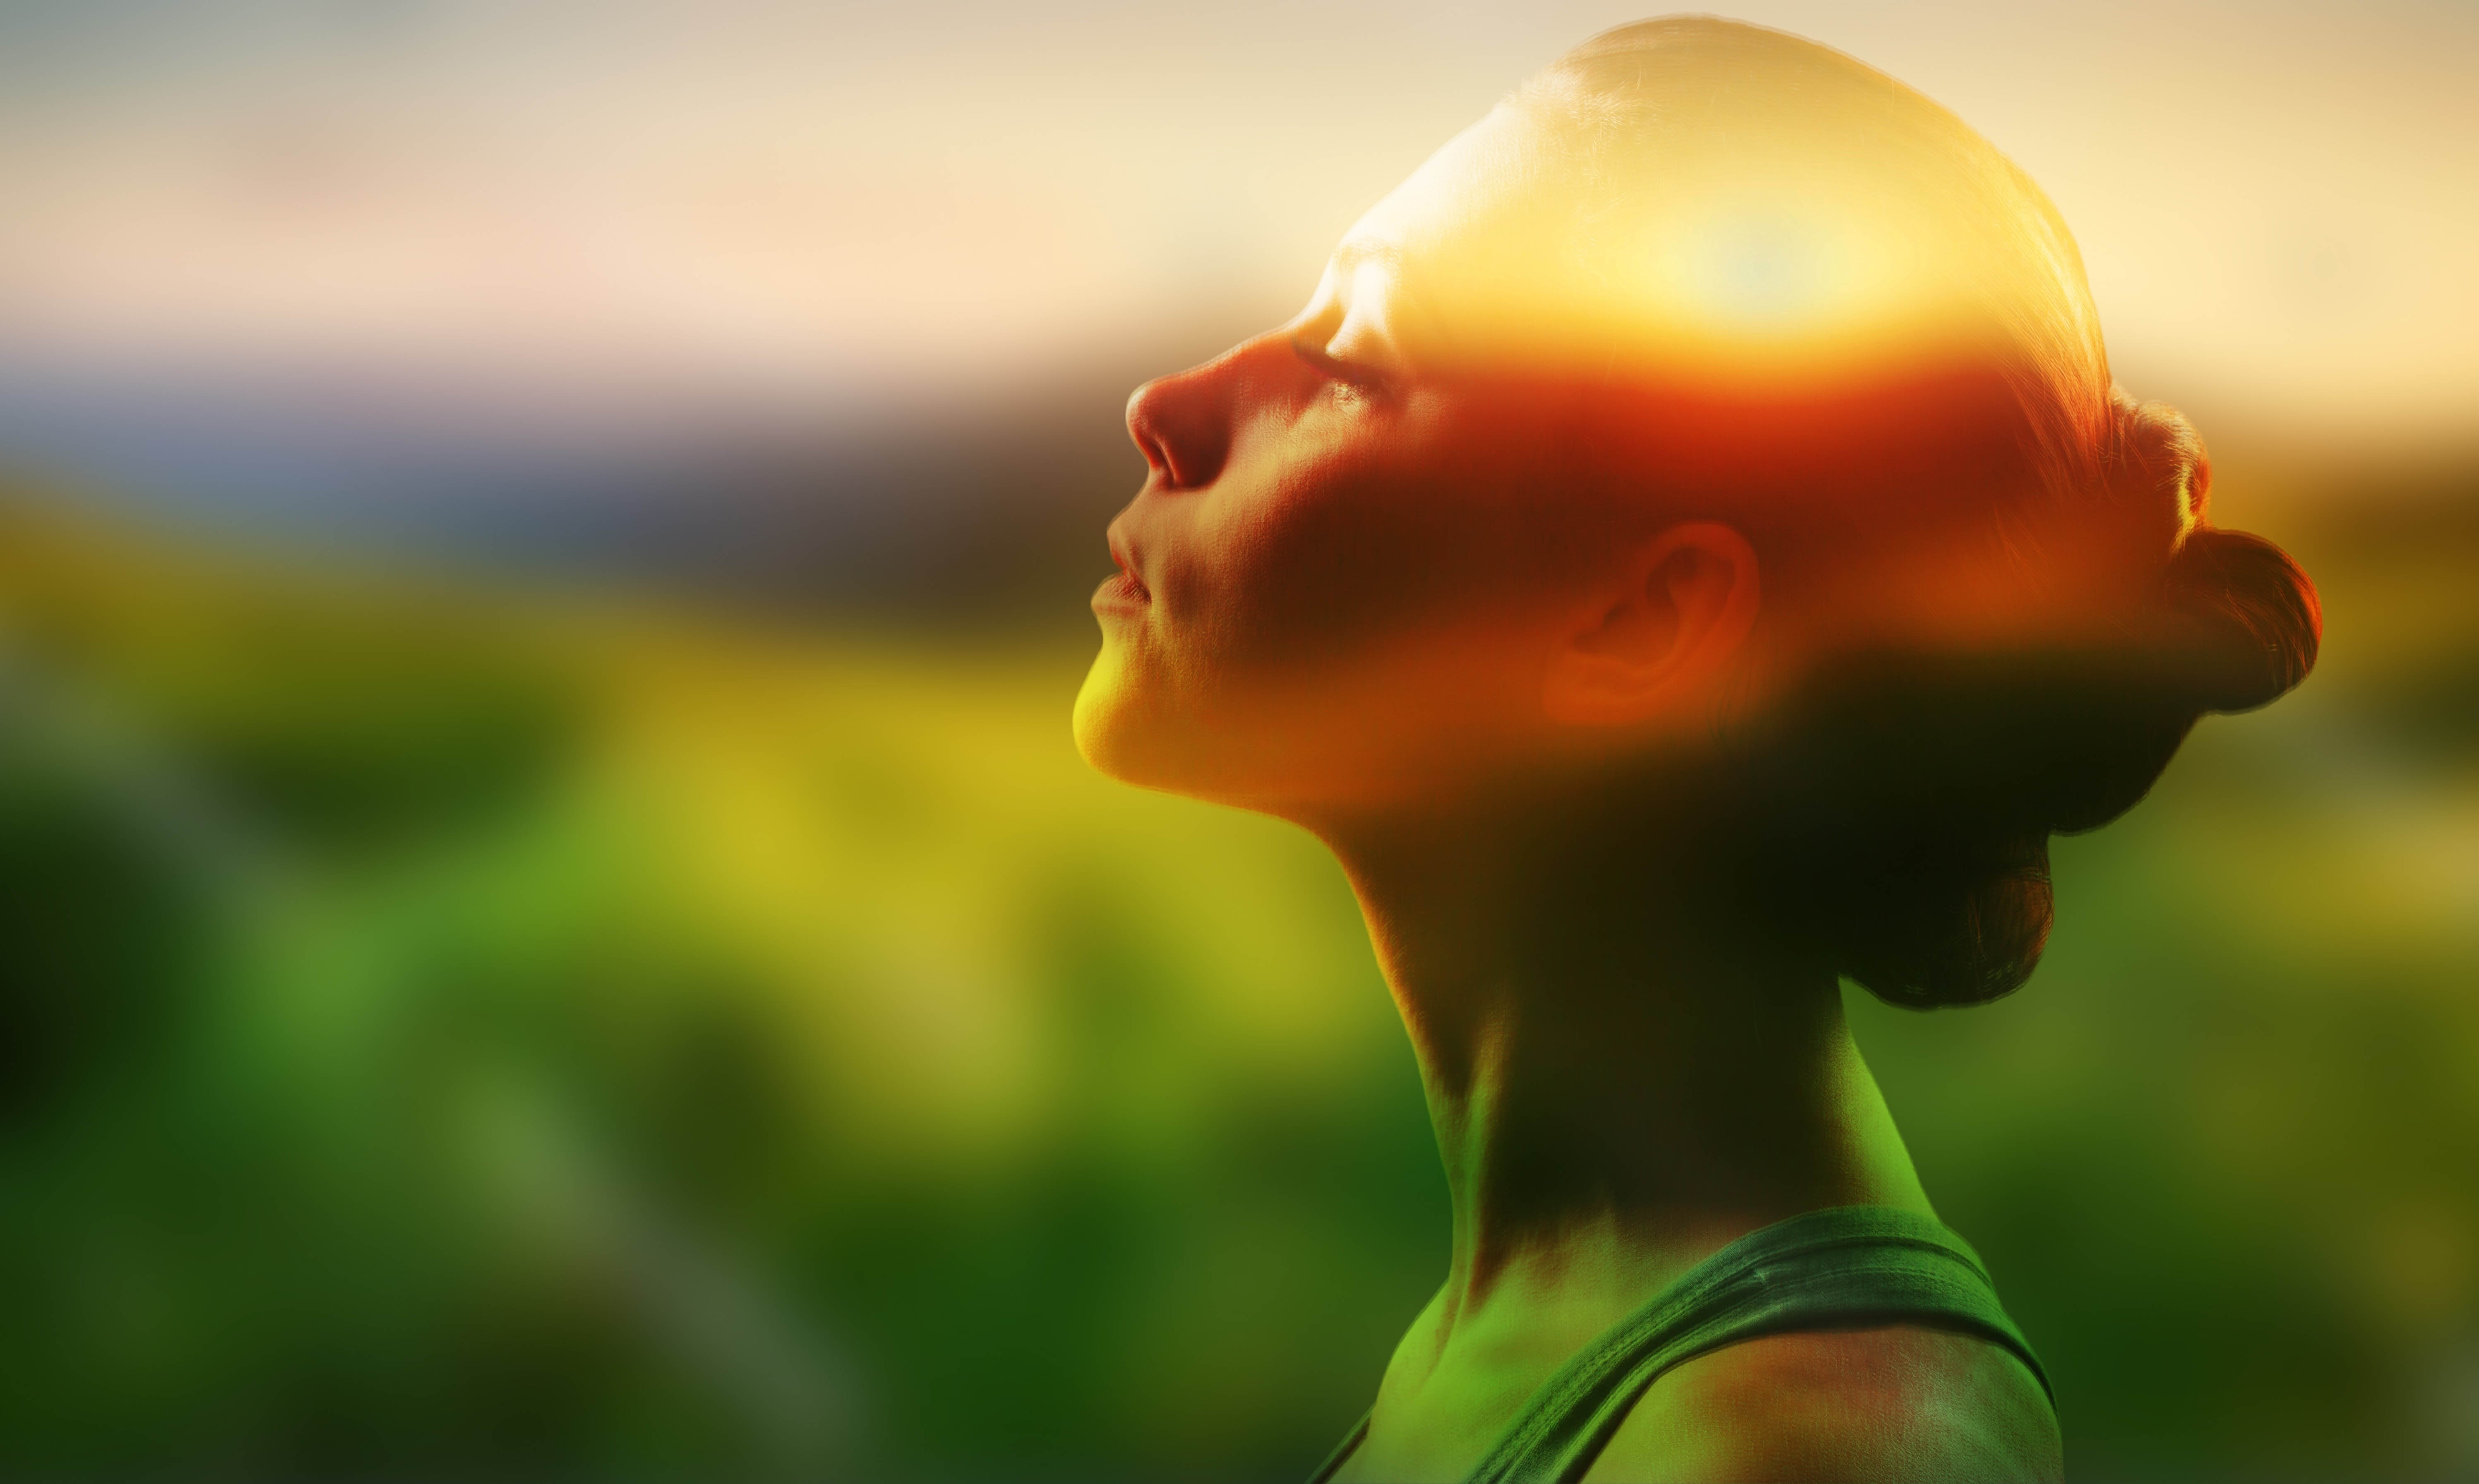 Woman with her eyes closed and face tilted towards the sun, showing her gratitude for life